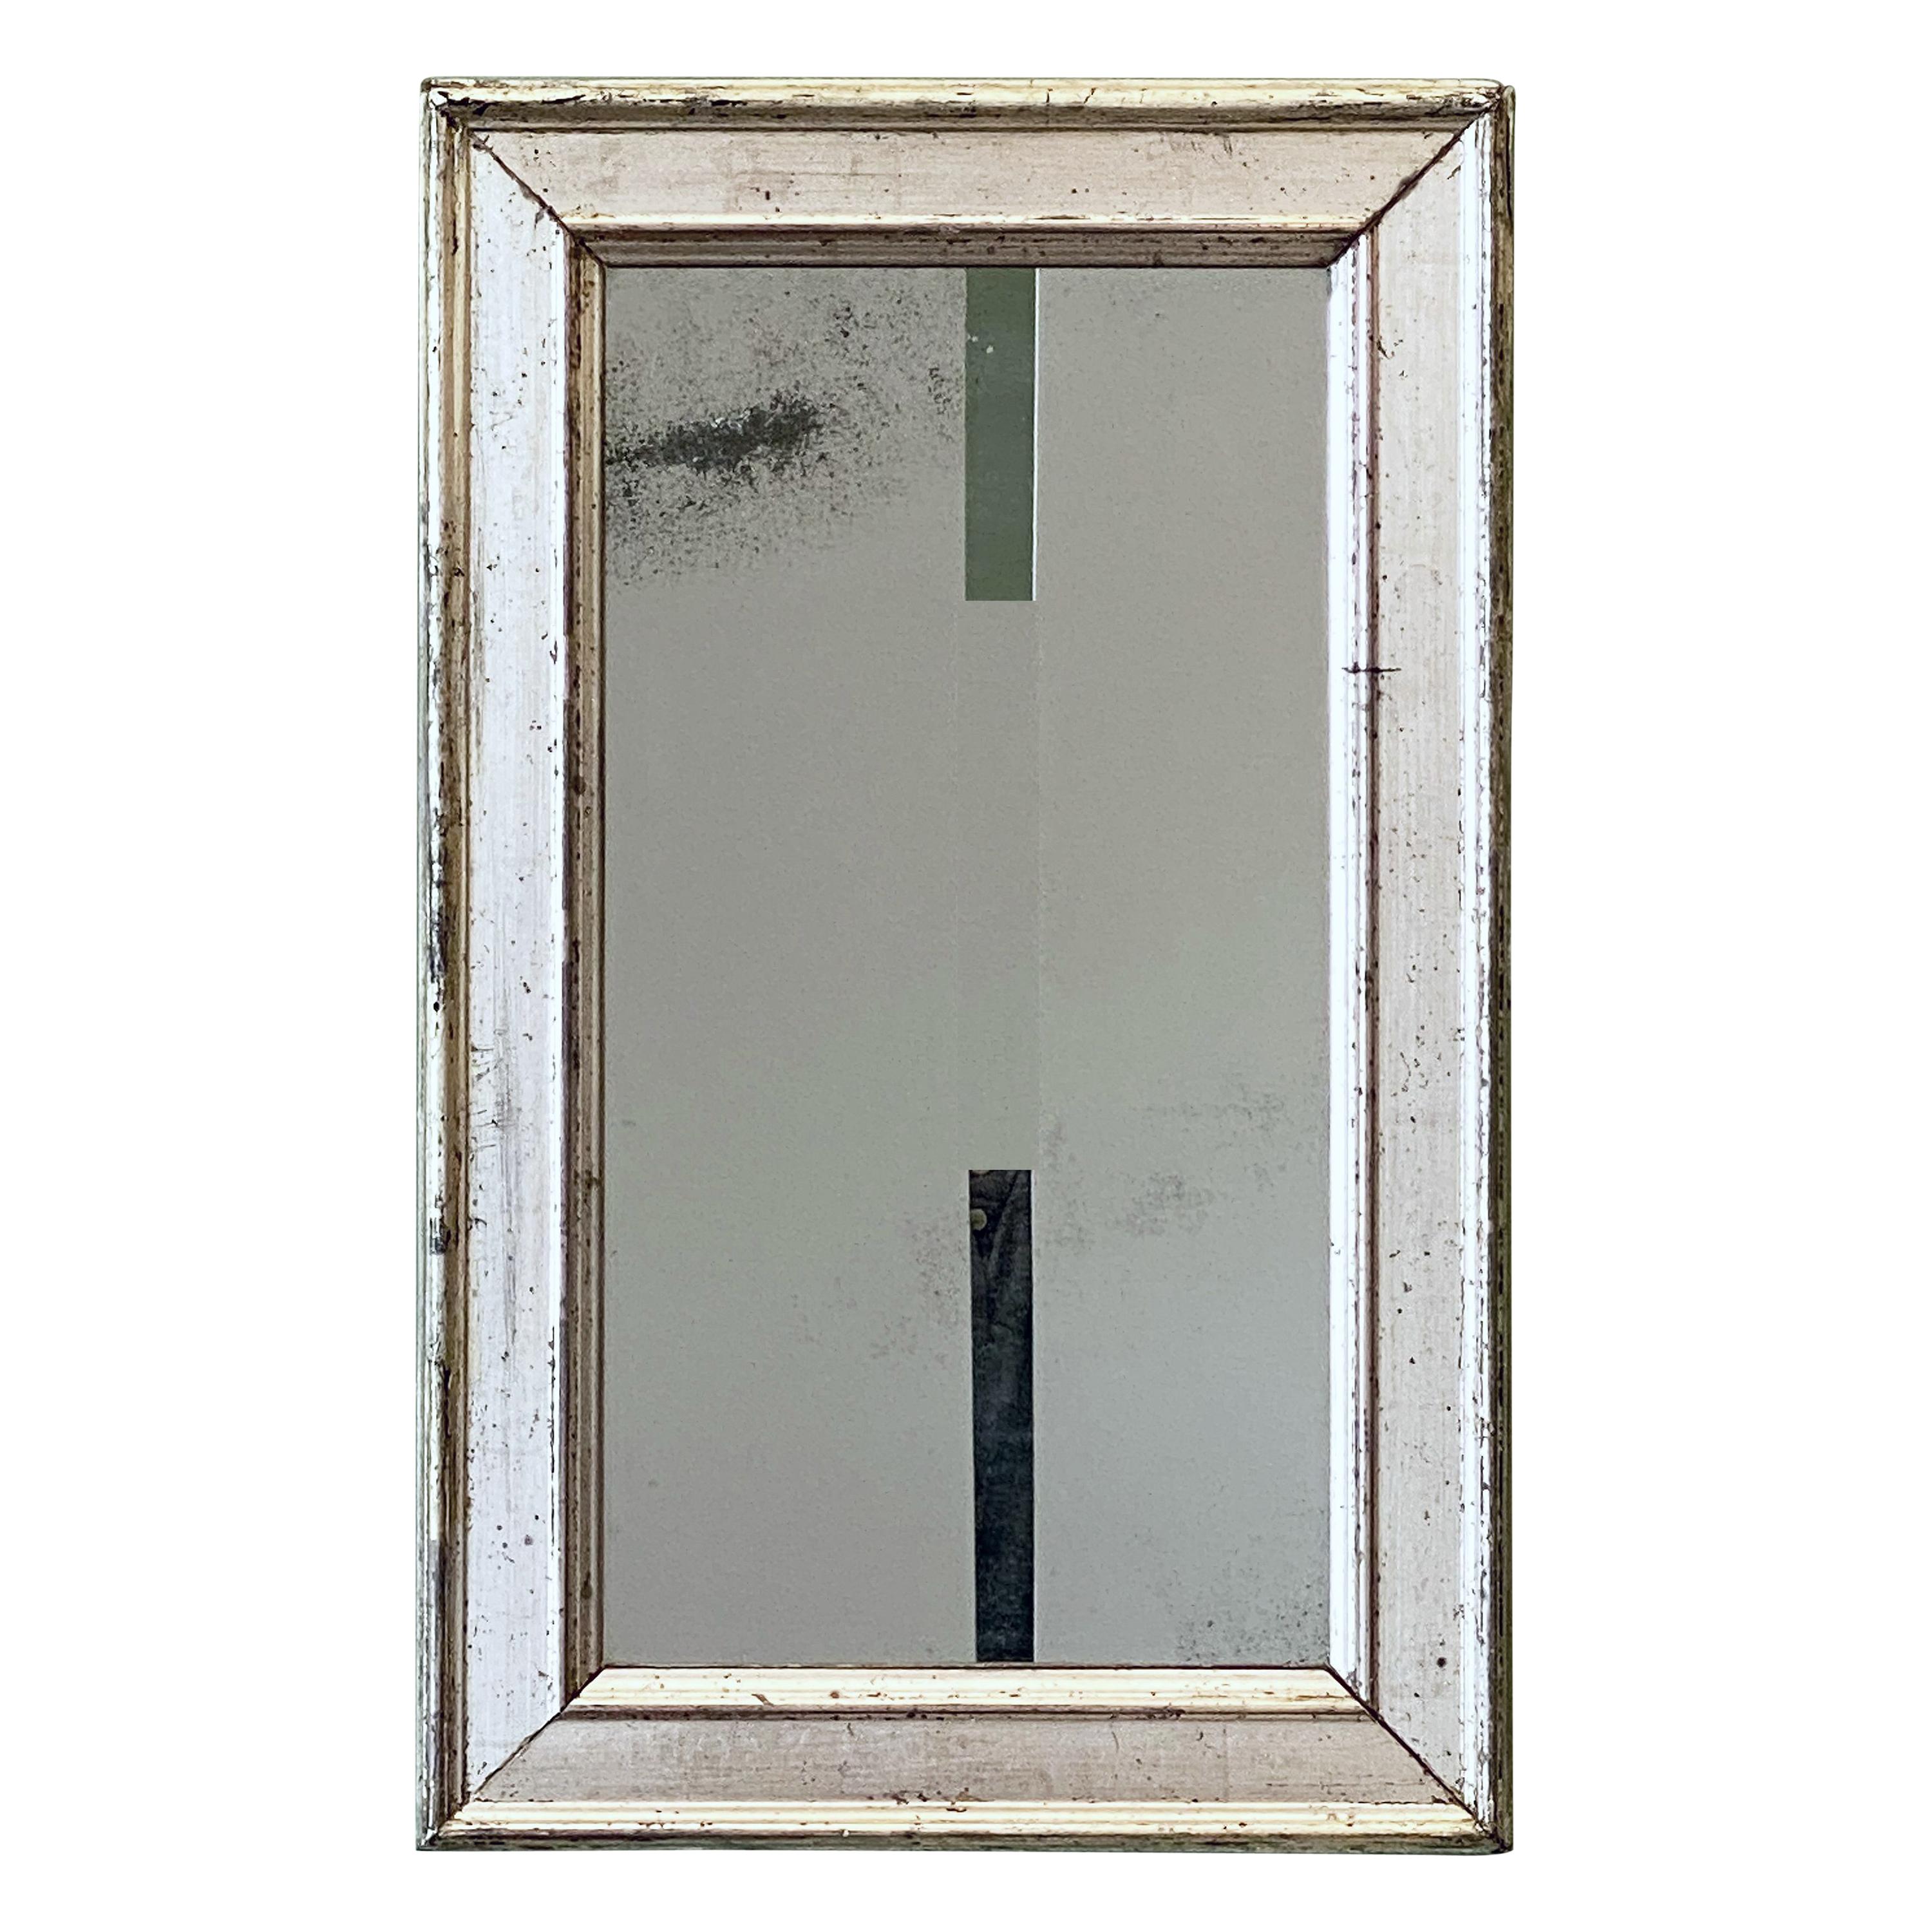 A fine French wall mirror from the 19th c., featuring a silver gilt rectangular frame around an original mirrored glass.

Dimensions are H 19 1/2 inches x W 12 1/4 inches.